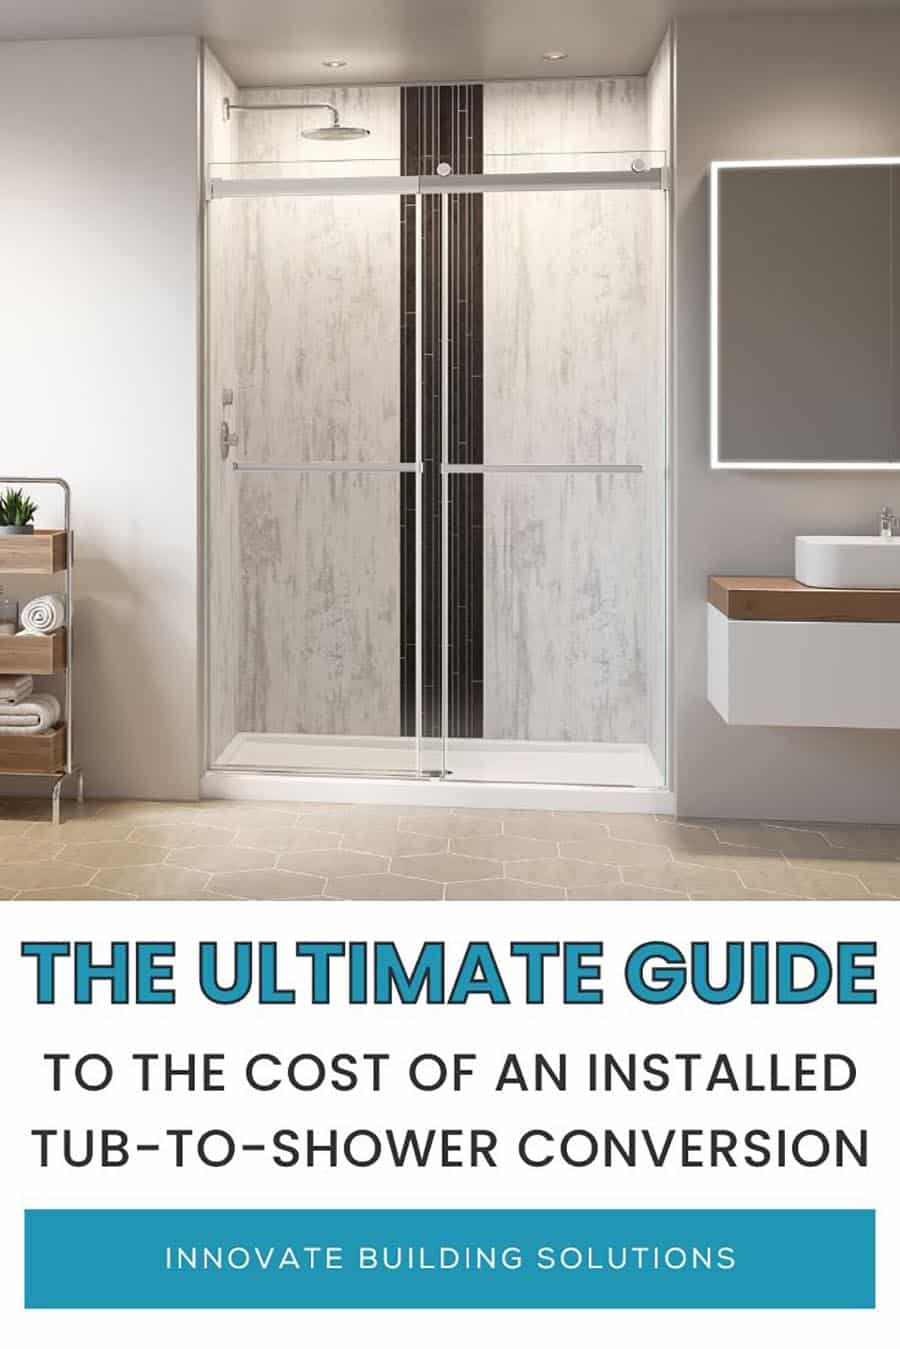 A comprehensive guide to the cost of an installed tub to shower | Innovate Building Solutions | Bathroom remodeling ideas | Guide for a contemporary shower remodel | bathroom design ideas